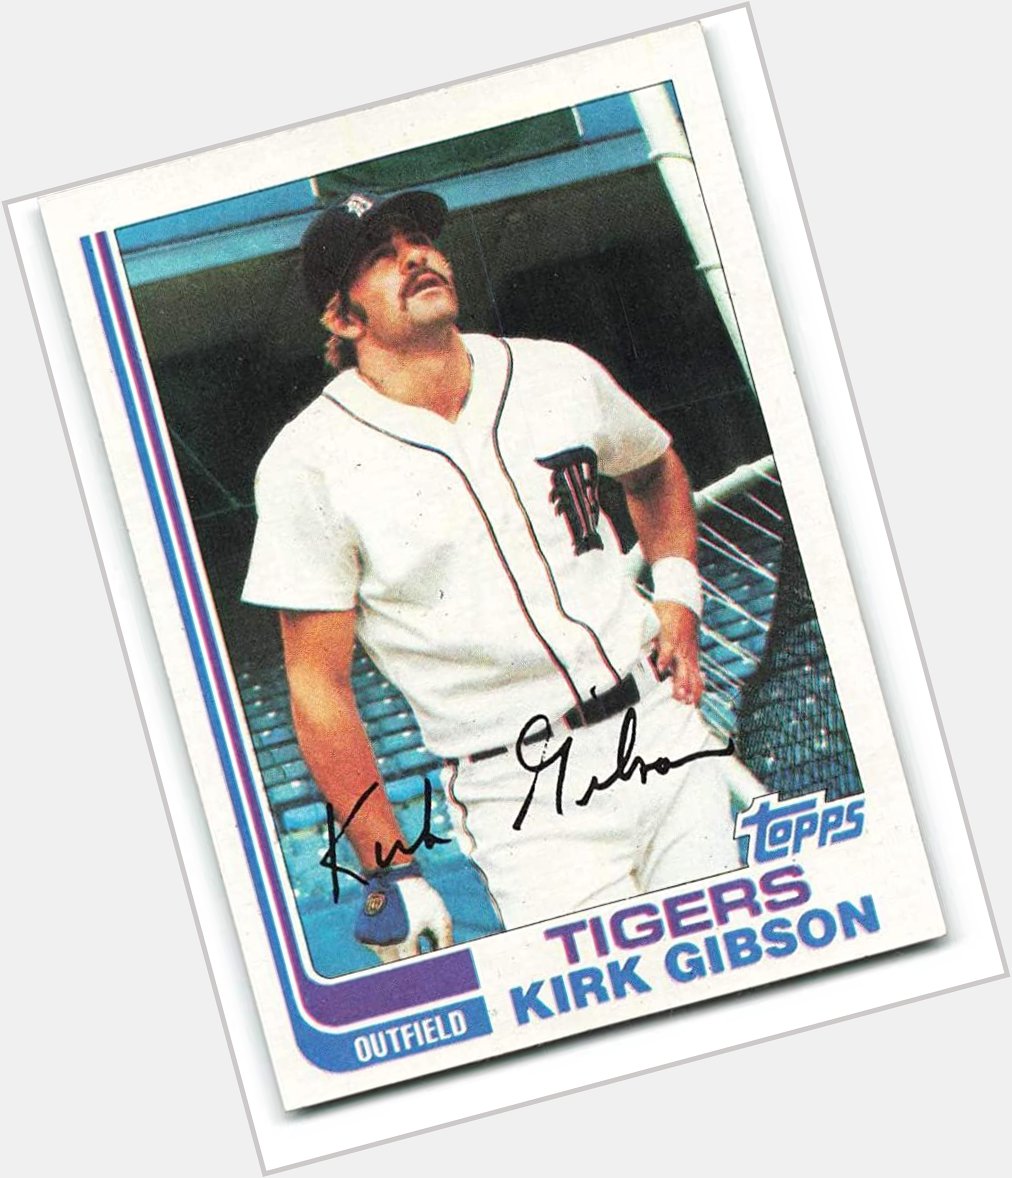 Happy birthday, Kirk Gibson! 

The Michigan State and Tigers legend was born on May 28, 1957 